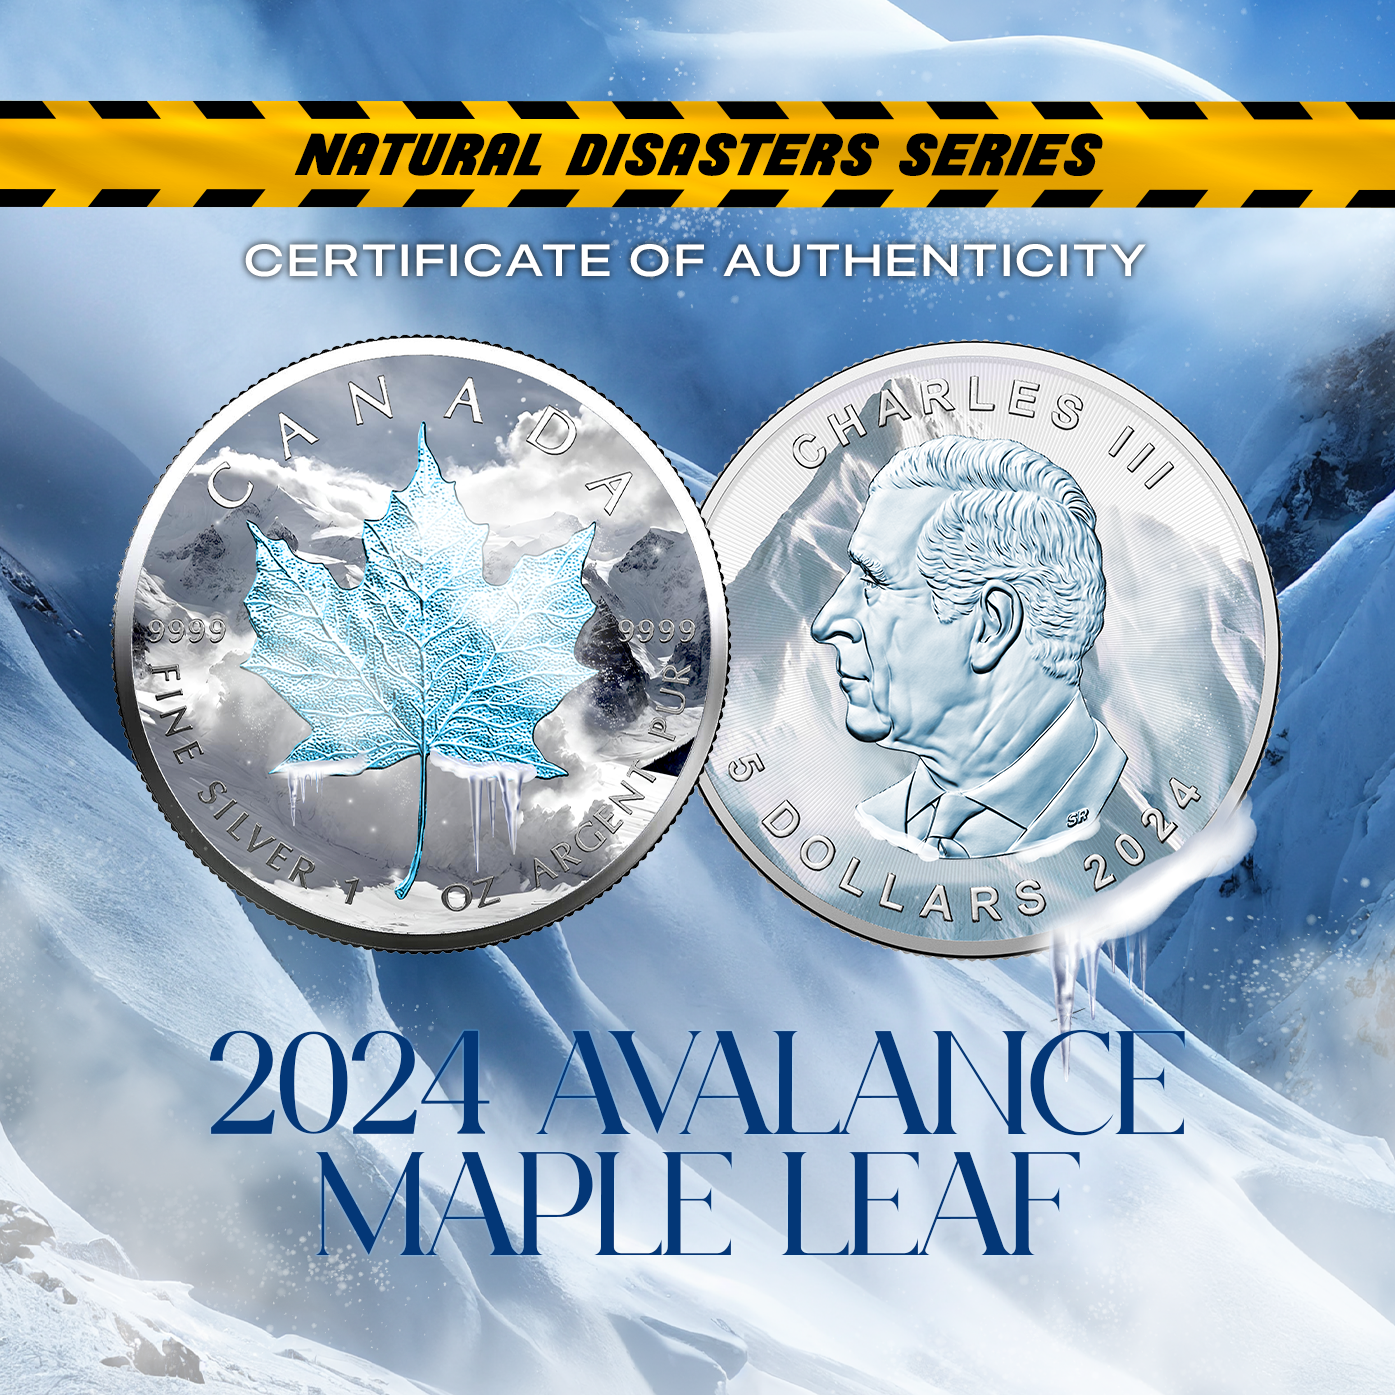 2024 1 oz Avalanche Maple Leaf Silver - Natural Disaster Series